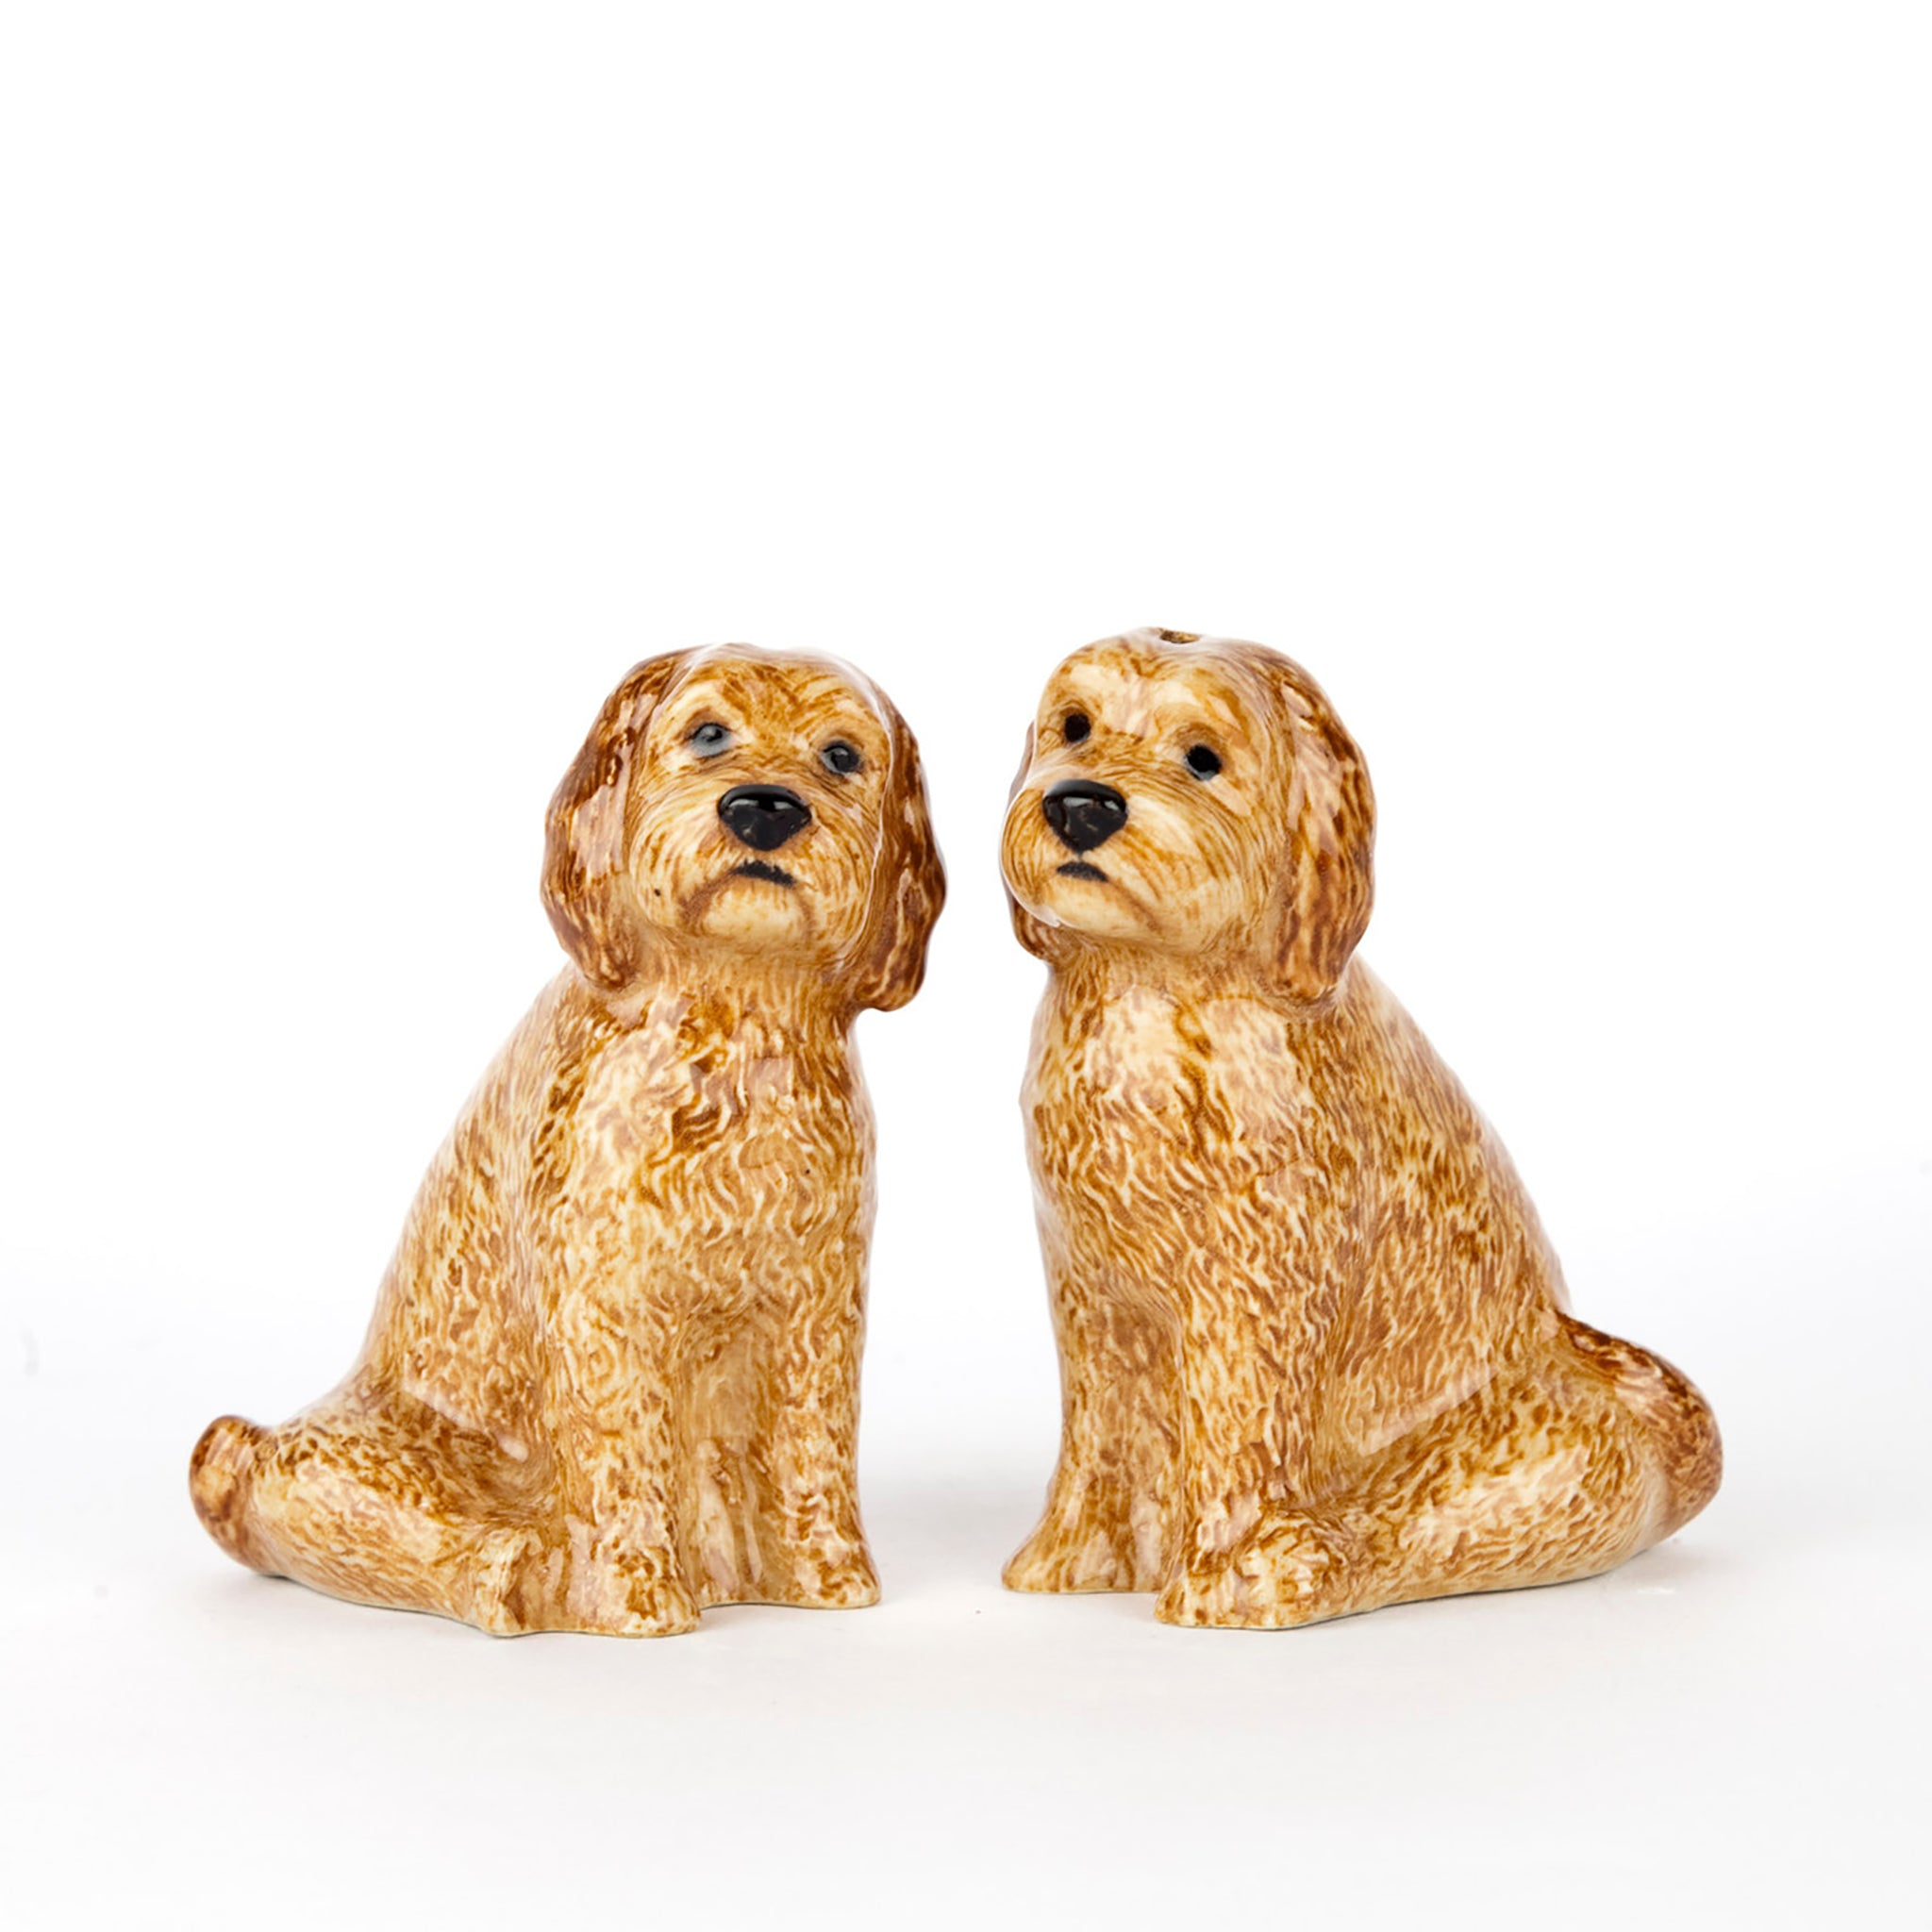 A pair of glazed ceramic salt and pepper shakers shaped like golden cockapoo dogs 